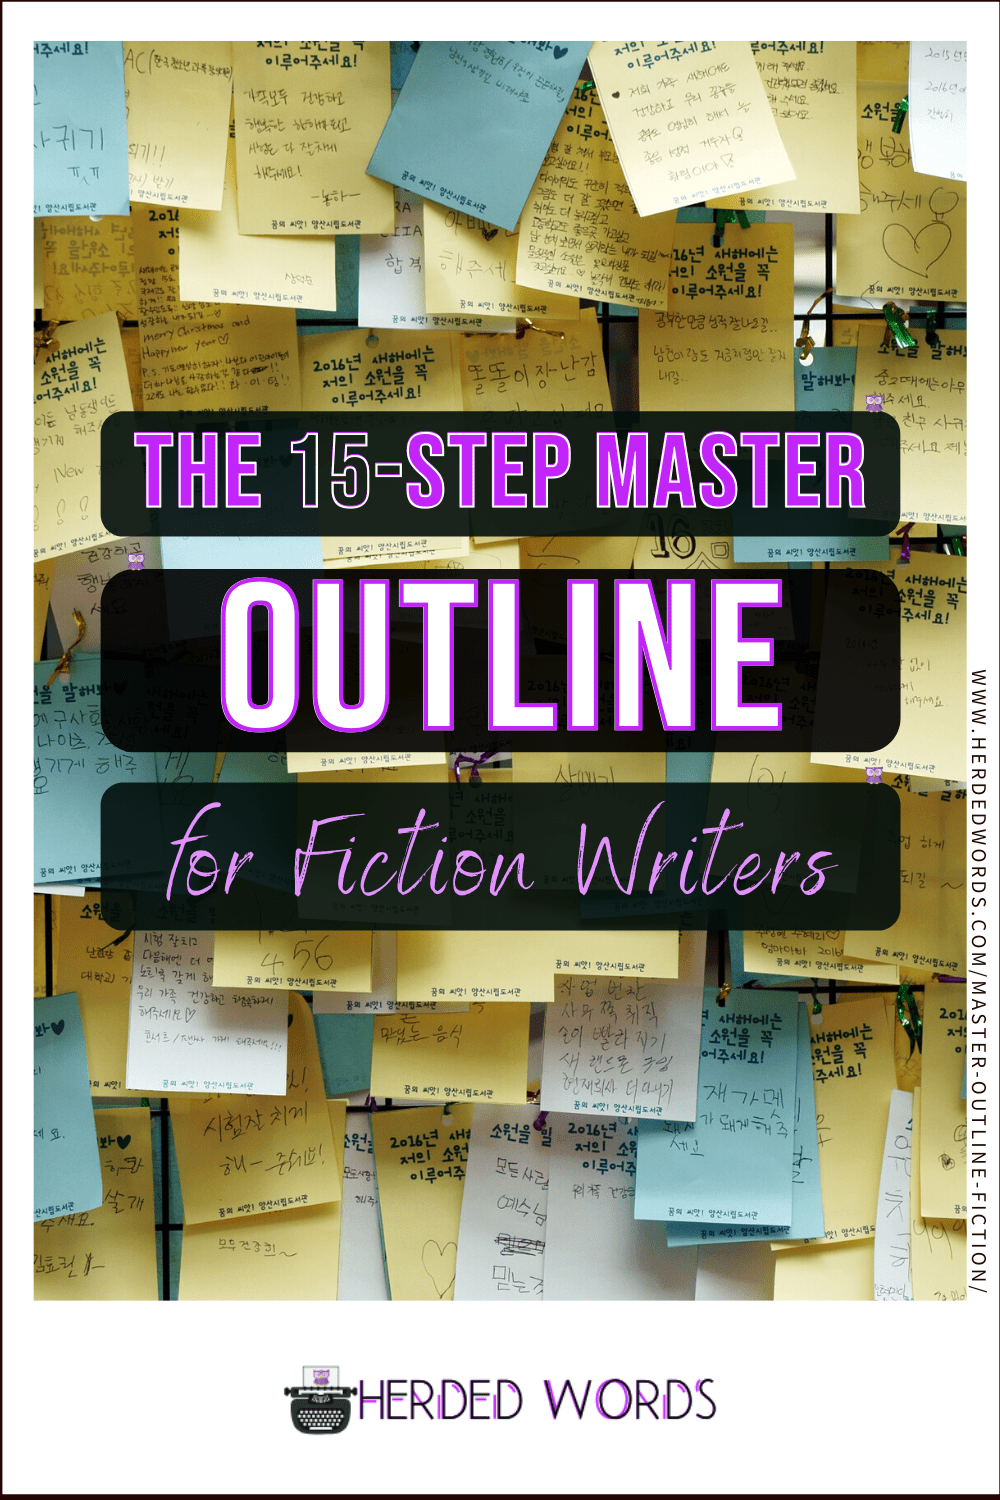 Image Link to The 15 Step Master Outline for Fiction Writers